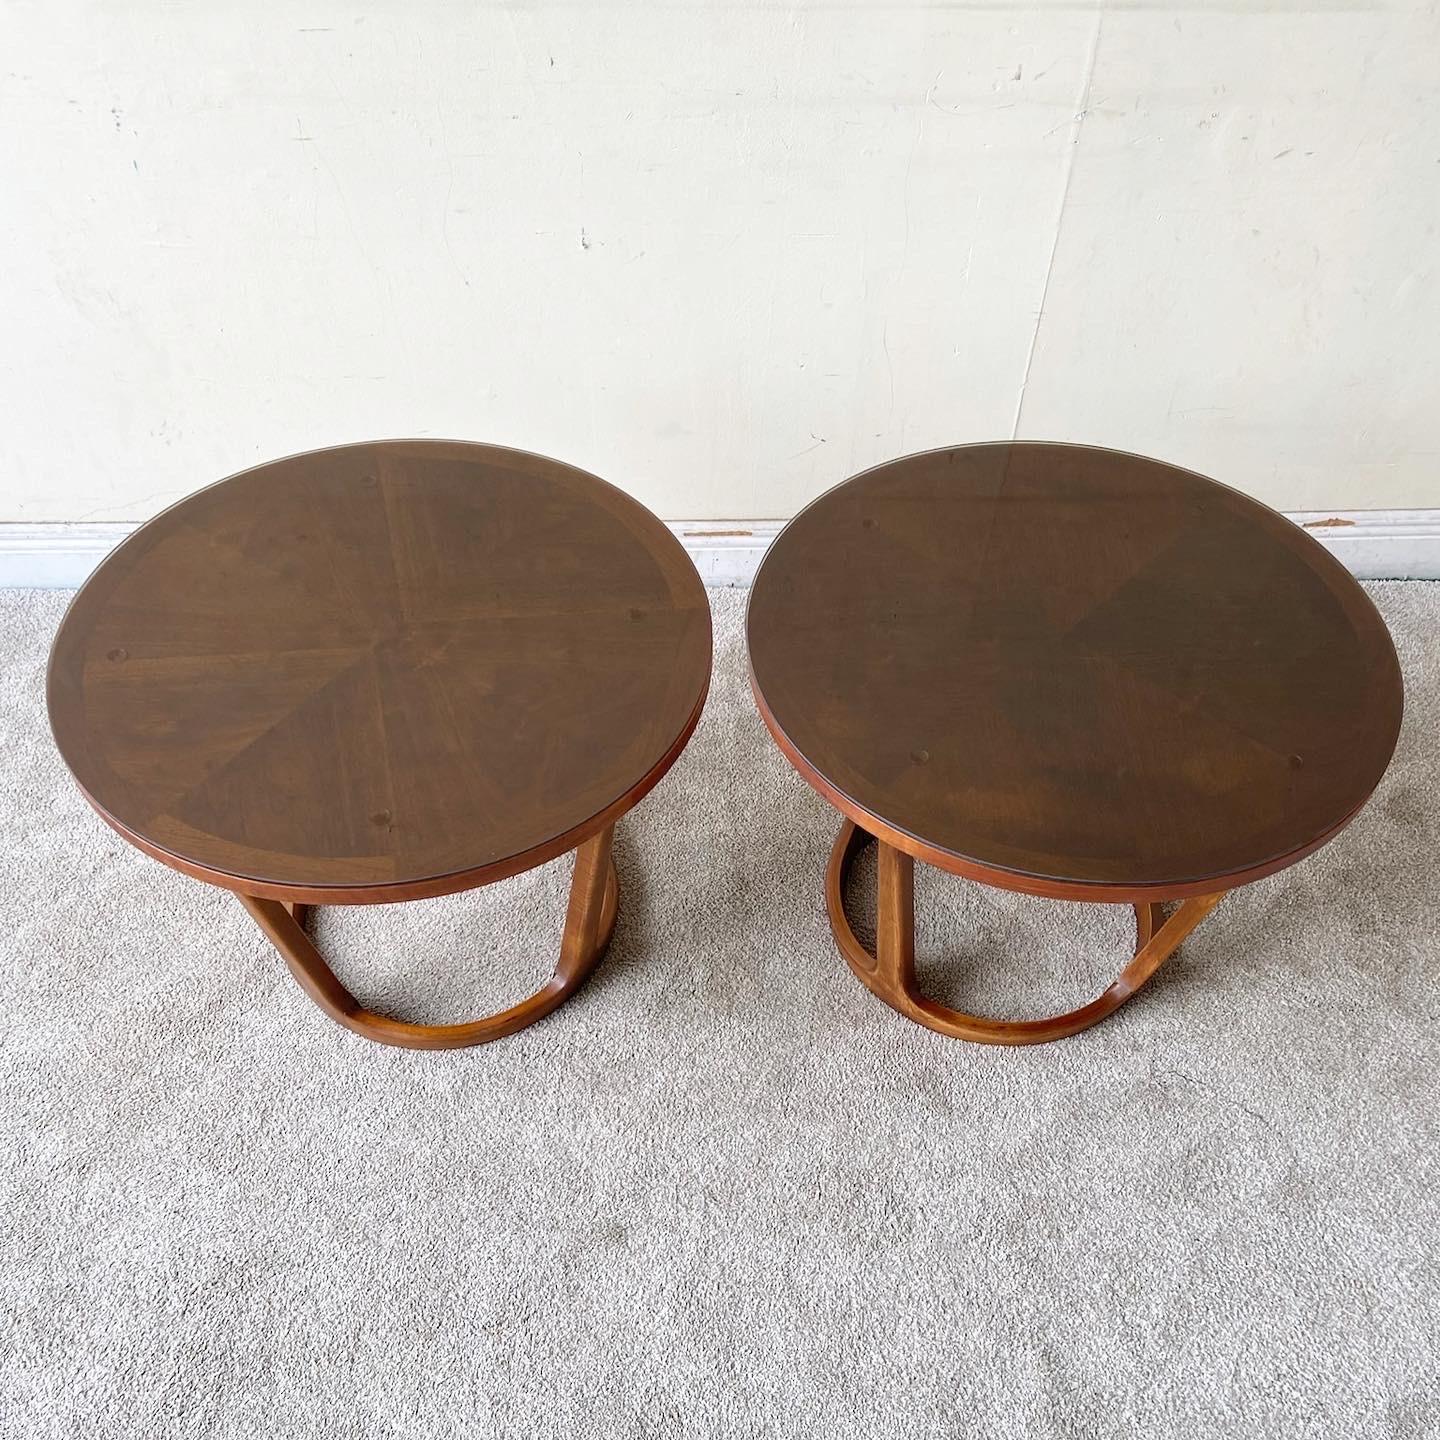 American Mid-Century Modern Circular Walnut Side Tables with Smoked Glass Top by Lane